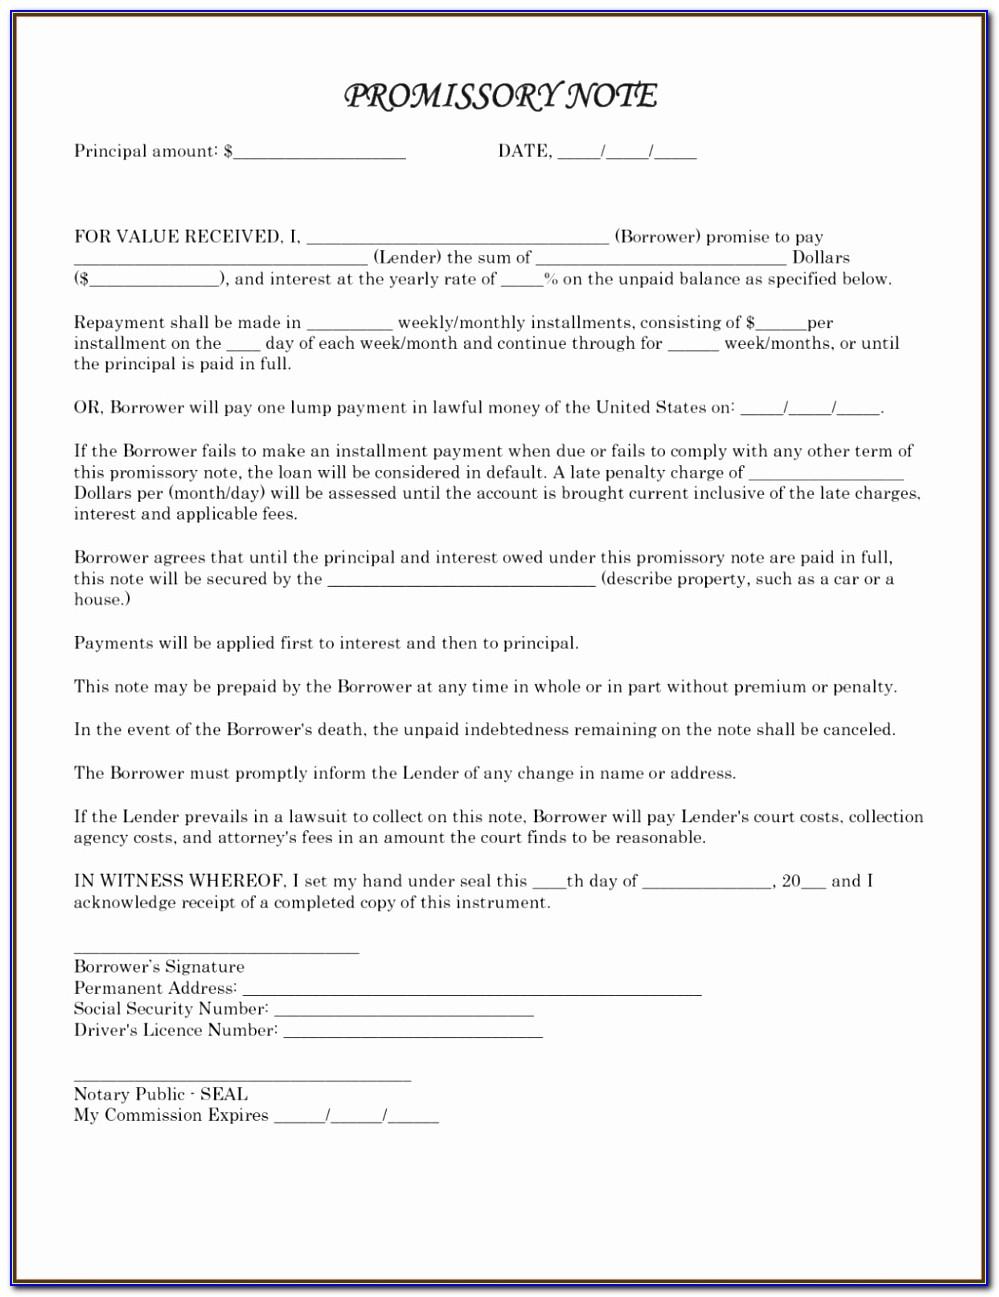 Promissory Note Agreement Template